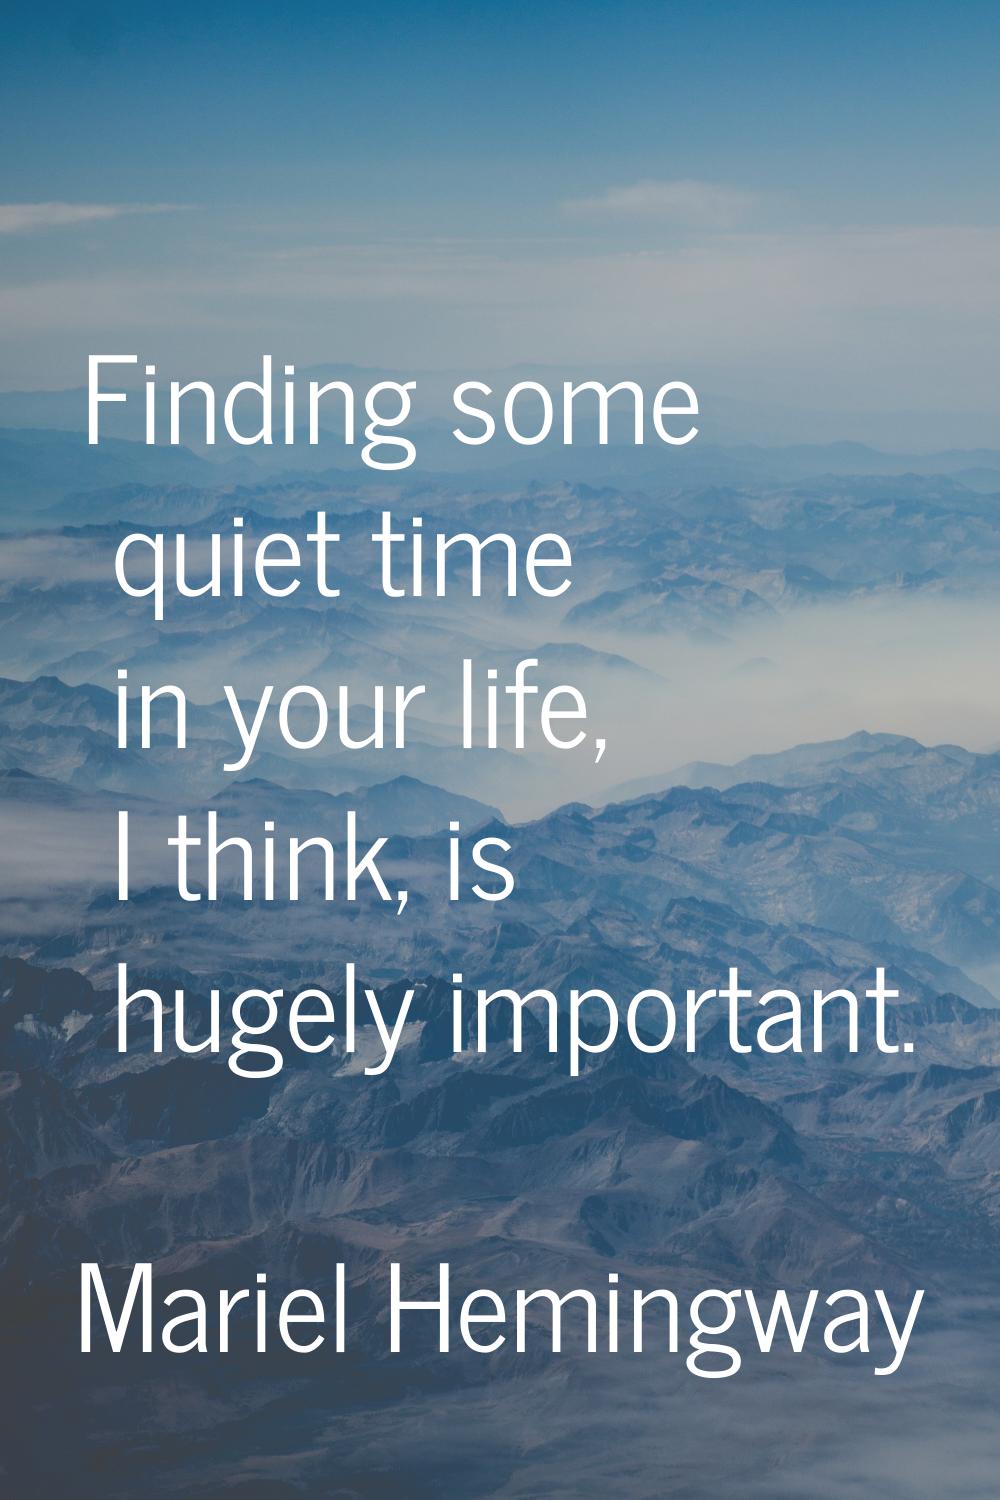 Finding some quiet time in your life, I think, is hugely important.